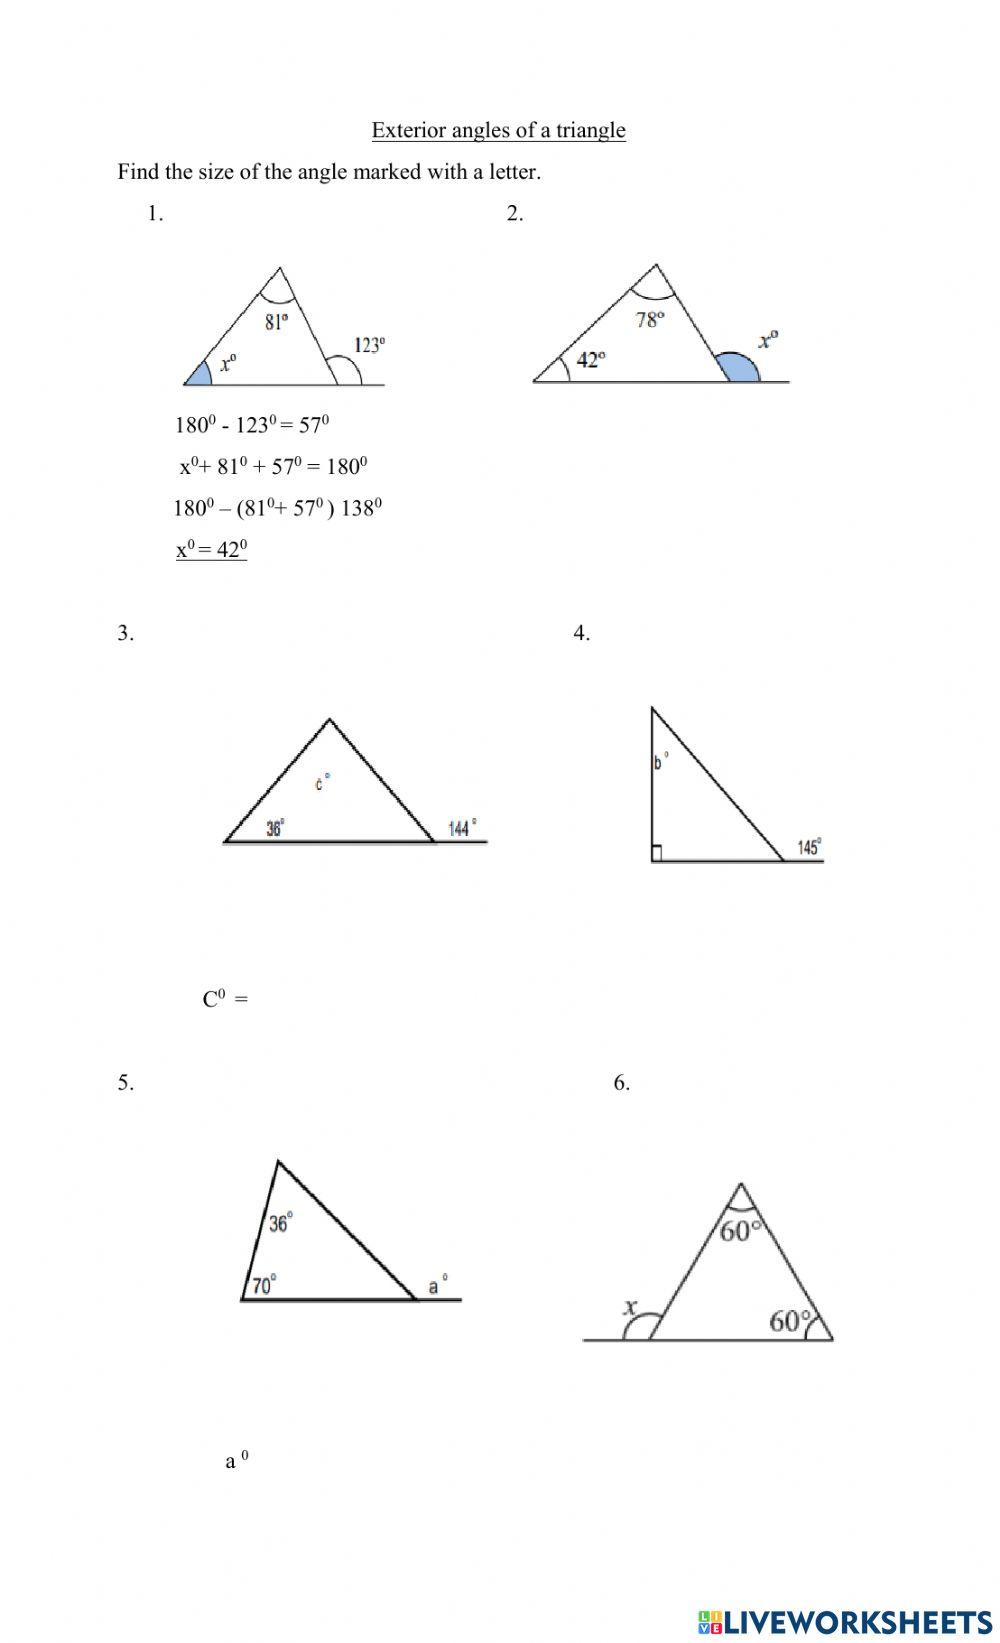 Exterior angles of triangles